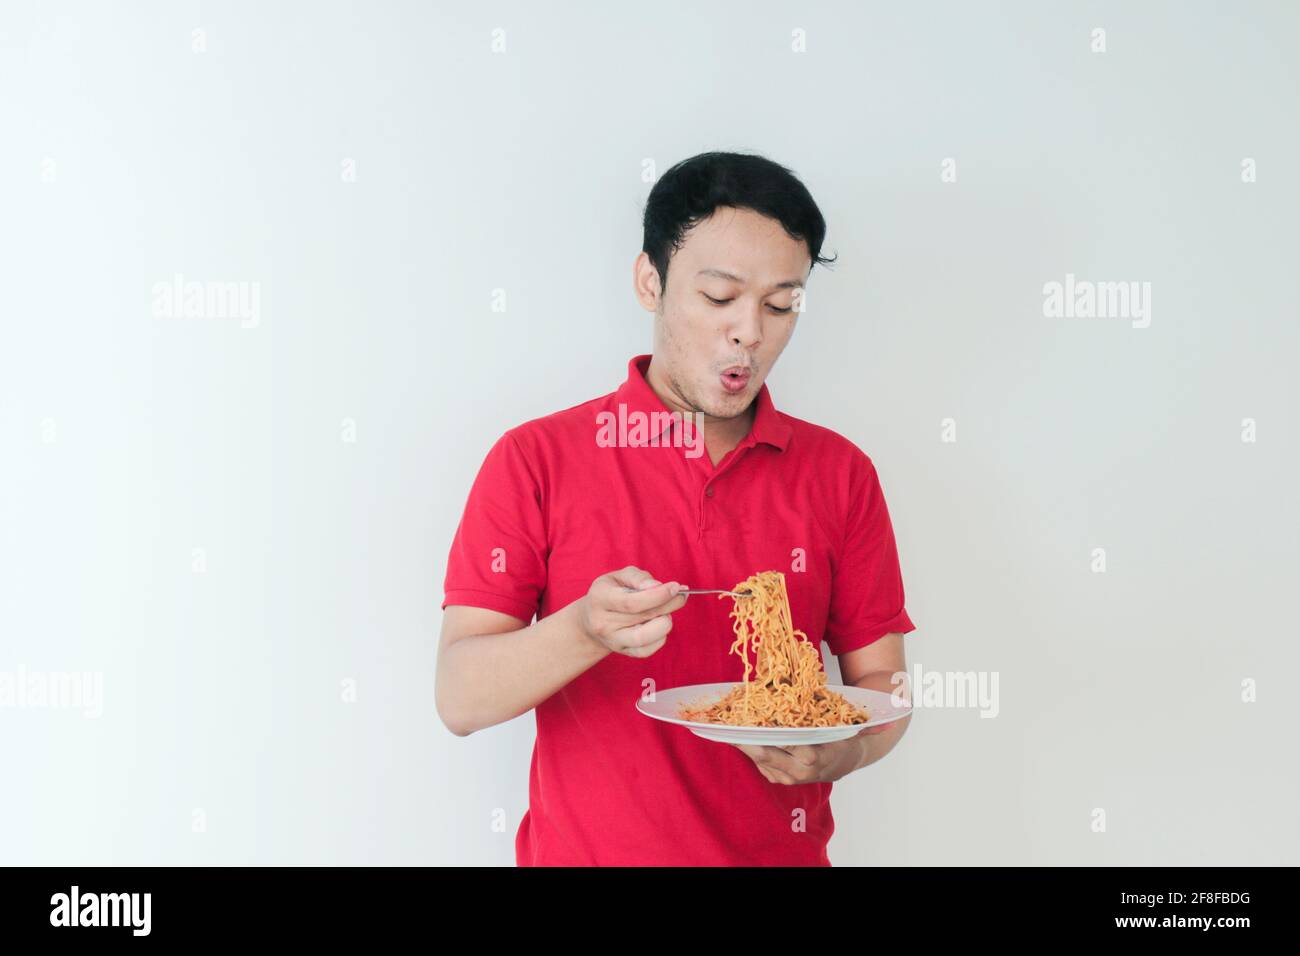 Portrait of Shock and Wow Young Asian man enjoy noodles. Eating lunch concept. Stock Photo